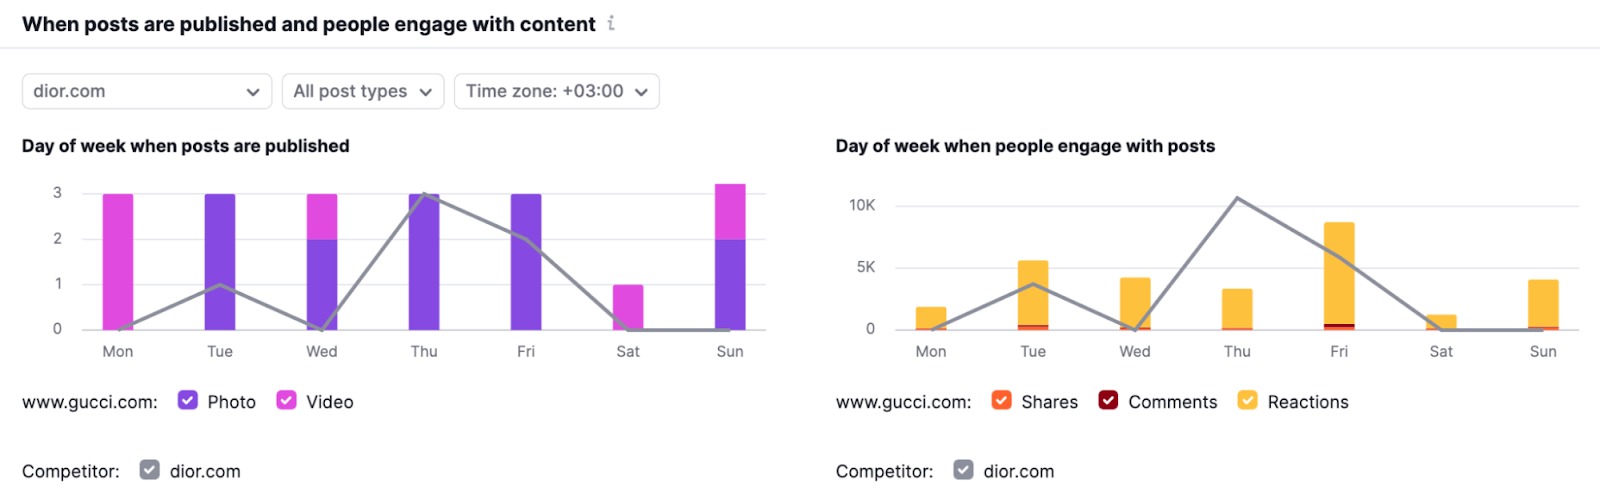 Graphs in Semrush Social showing when posts are published and people engage with content